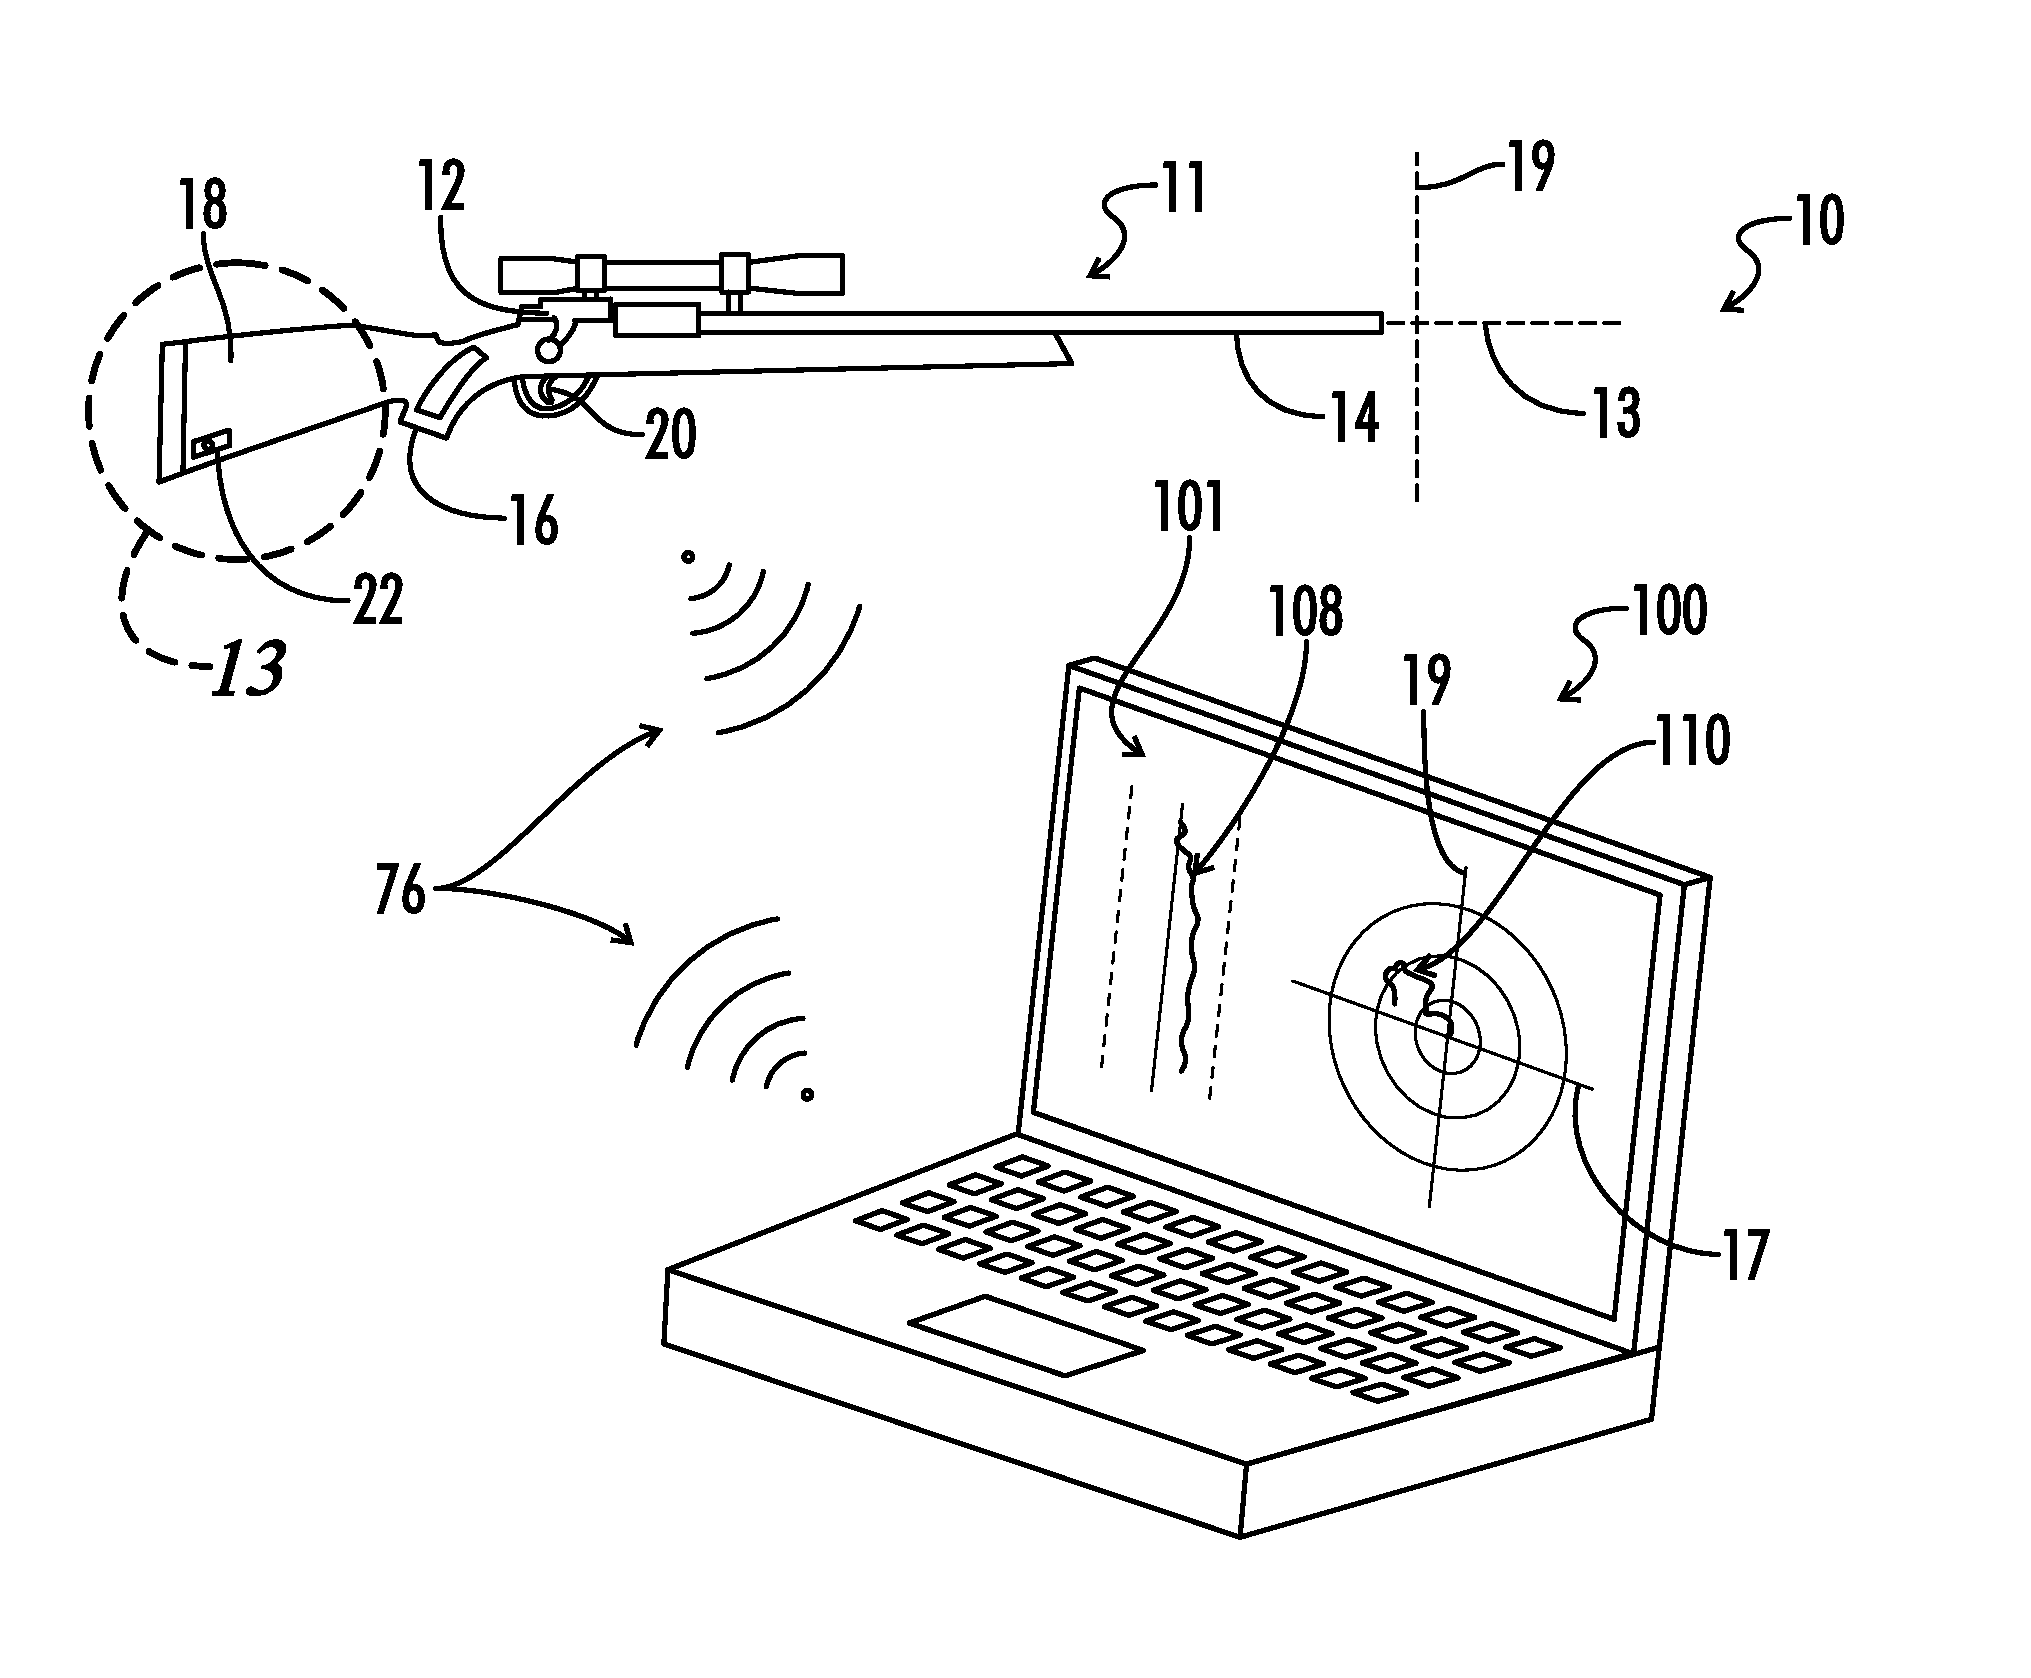 Firearm trigger pull training system and methods